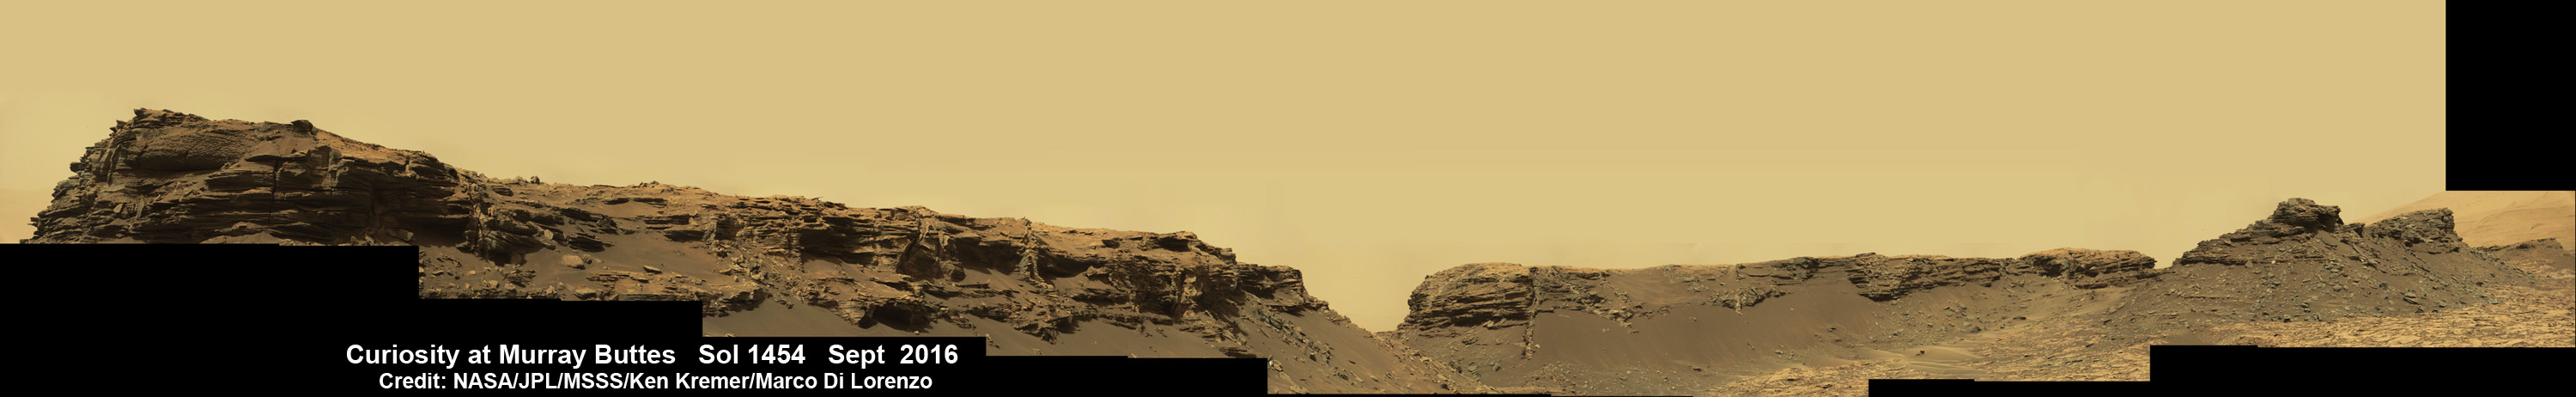 Spectacular wide angle mosaic view showing sloping buttes and layered outcrops within the Murray Buttes region on lower Mount Sharp from the Mast Camera (Mastcam) on NASA's Curiosity Mars rover. This photo mosaic is stitched from Mastcam camera raw images taken on Sol 1454, Sept. 9, 2016 with added artificial sky.  Credit: NASA/JPL/MSSS/Ken Kremer/kenkremer.com/Marco Di Lorenzo